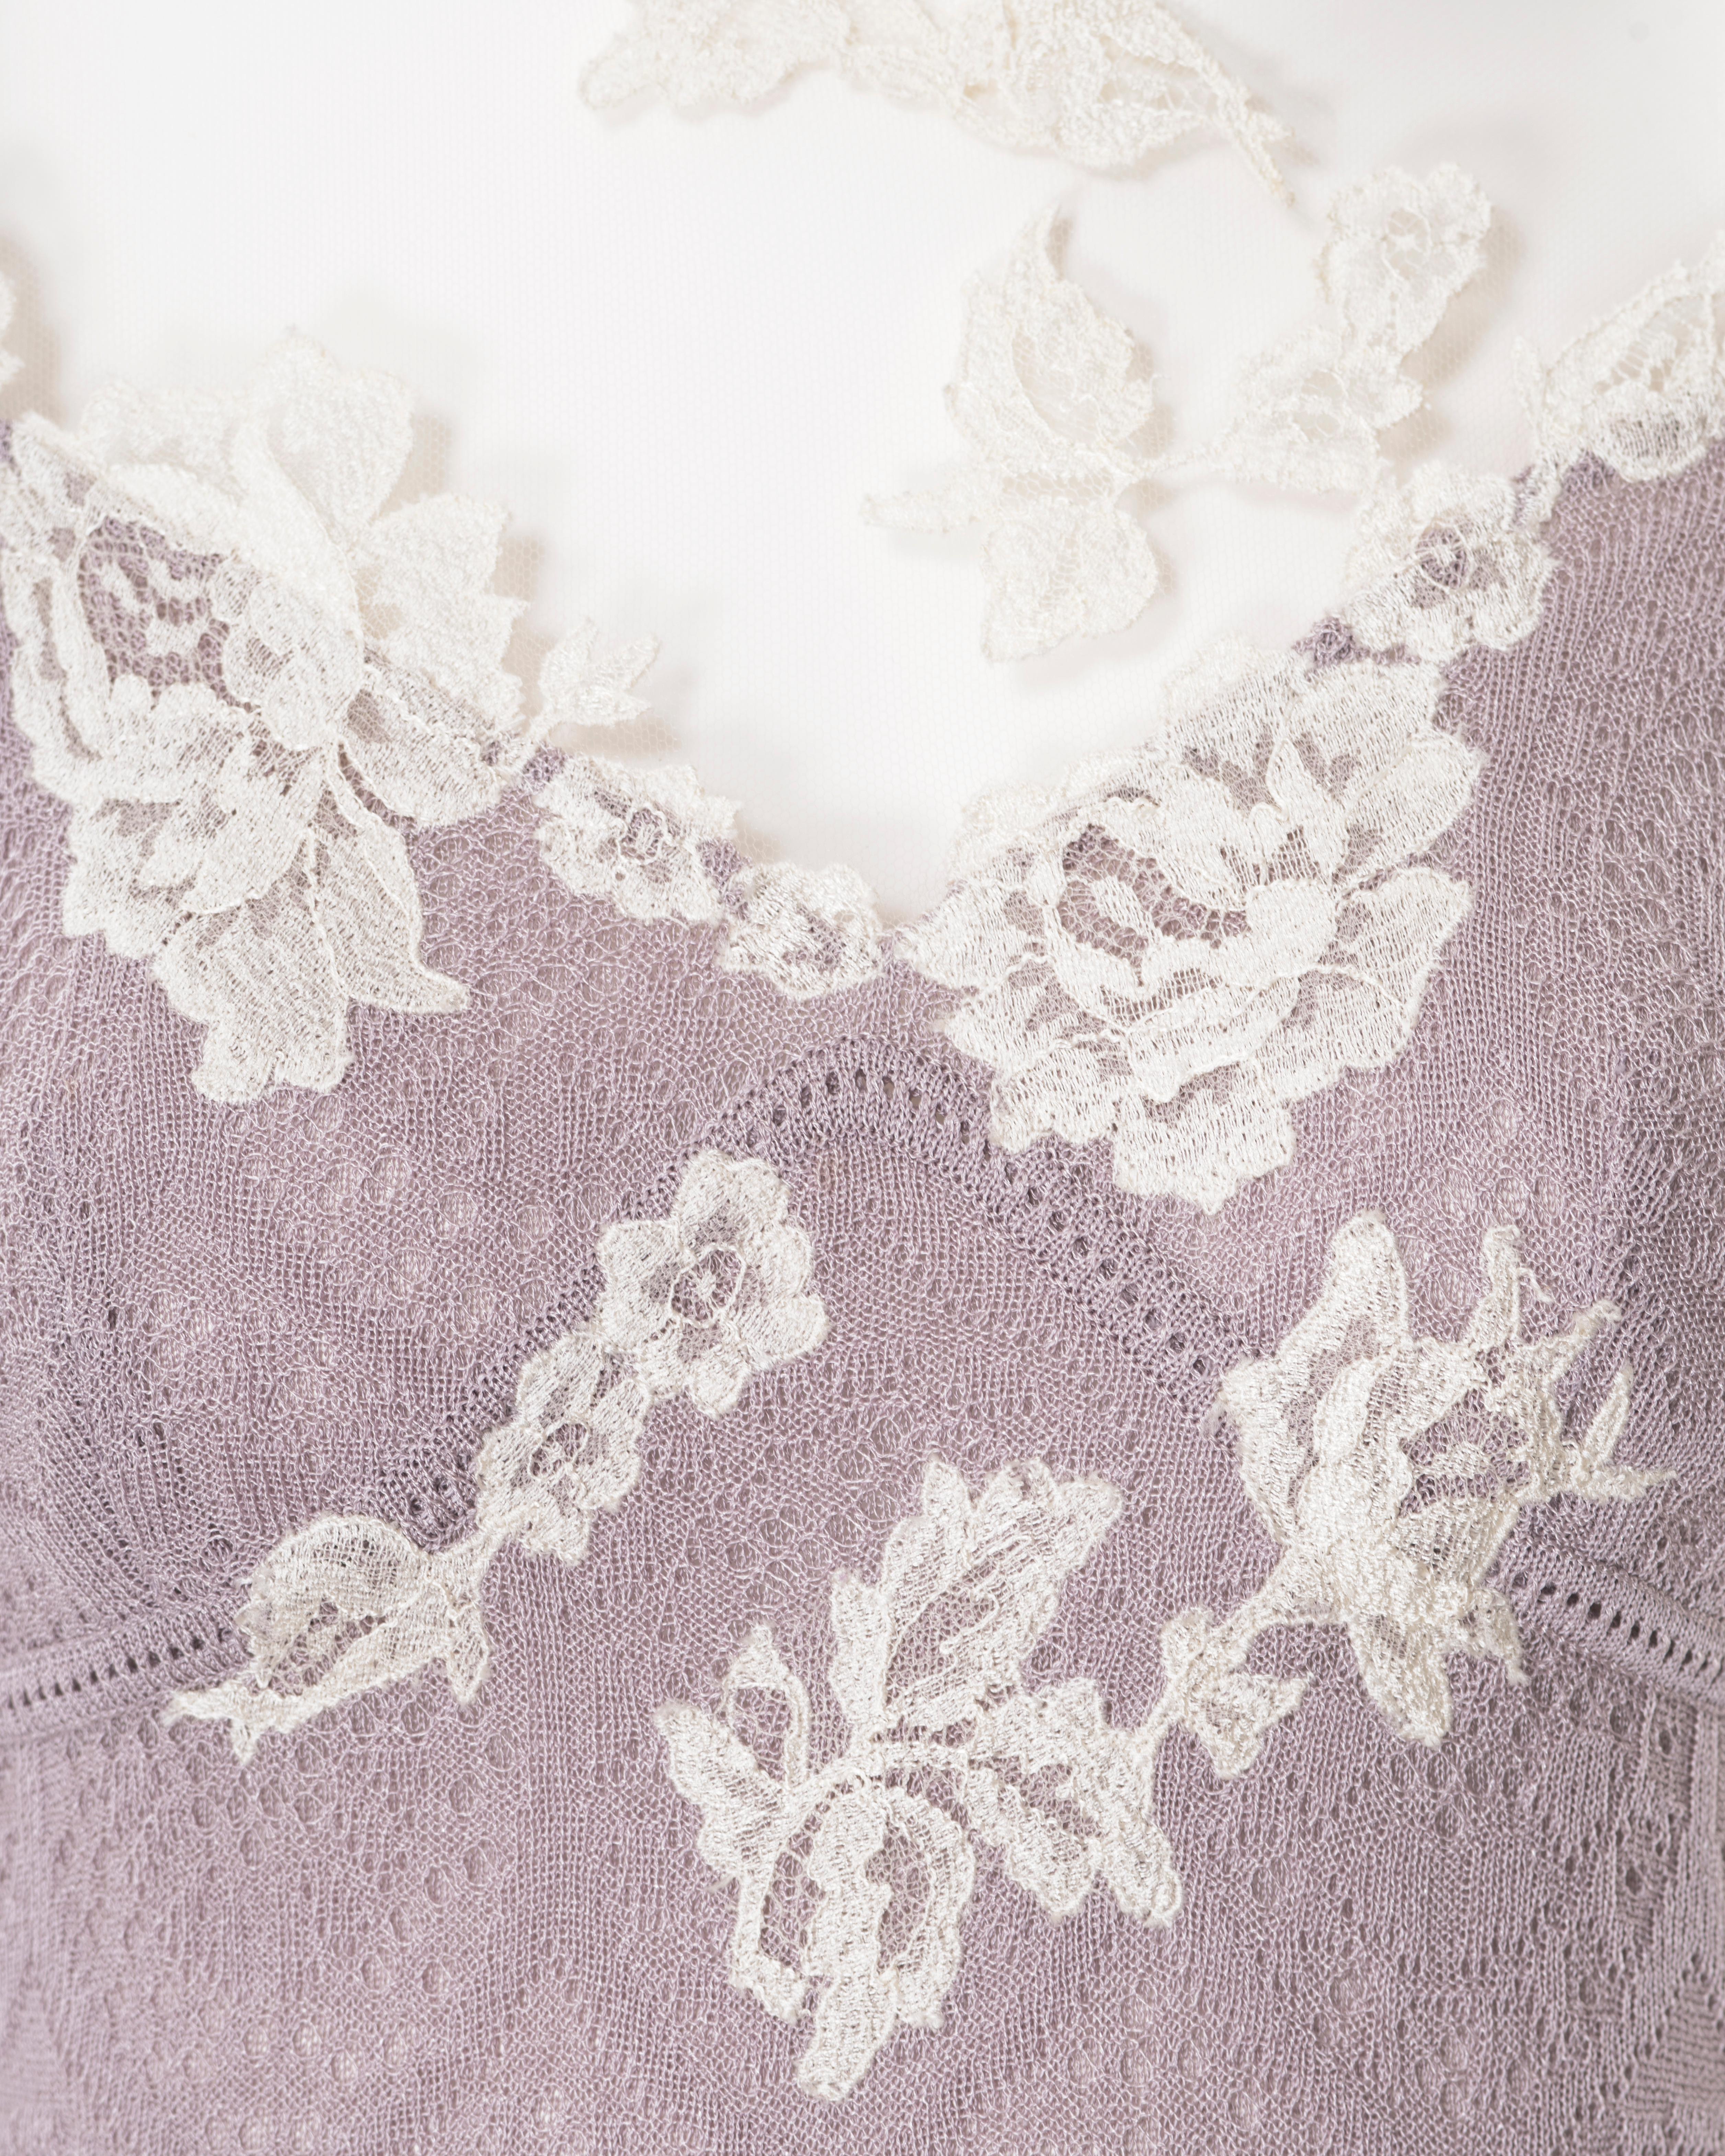 Women's John Galliano lilac knitted lace dress with cream lace and mesh, ss 1998